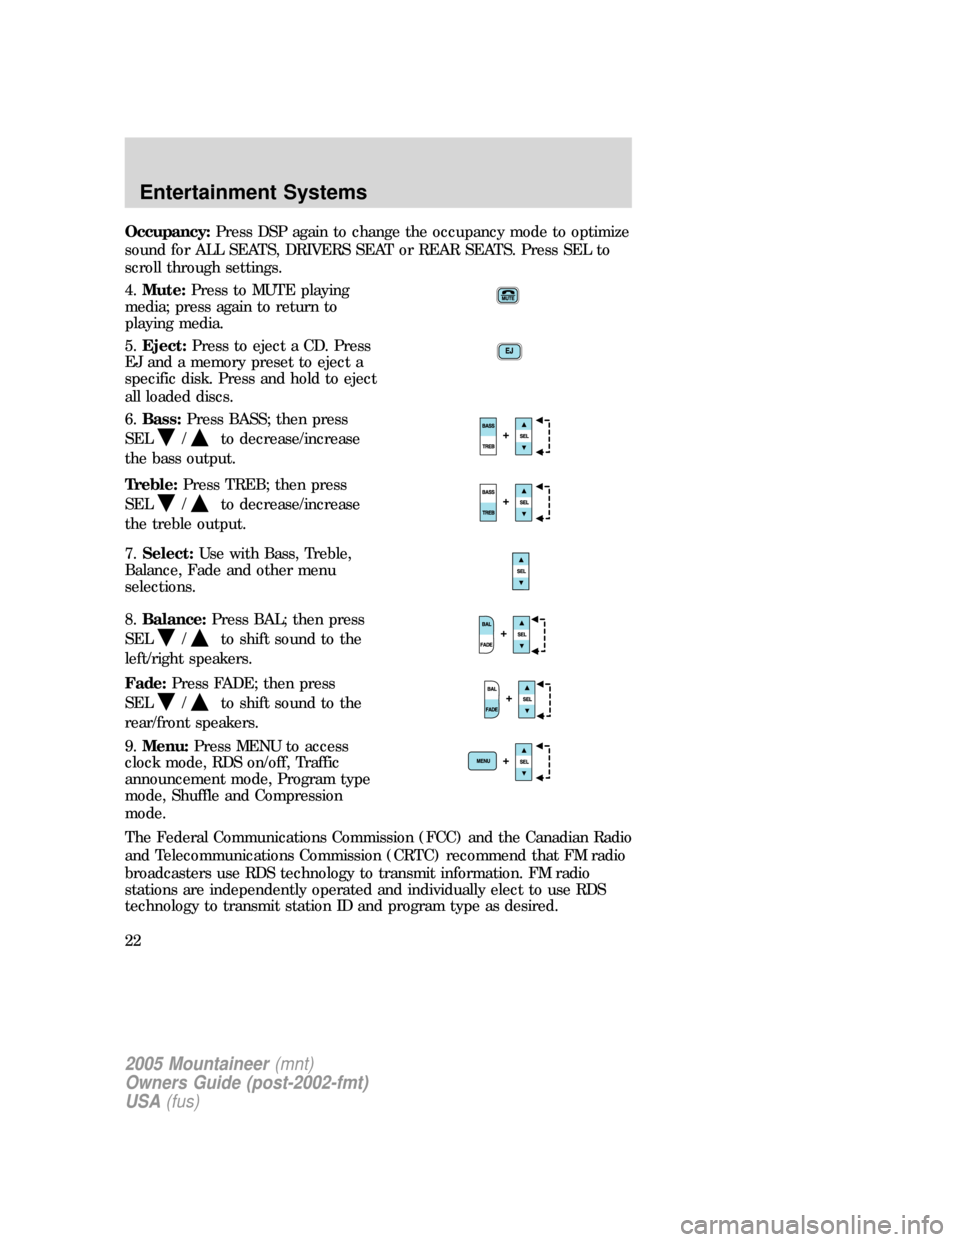 Mercury Mountaineer 2005  Owners Manuals Occupancy:Press DSP again to change the occupancy mode to optimize
sound for ALL SEATS, DRIVERS SEAT or REAR SEATS. Press SEL to
scroll through settings.
4.Mute:Press to MUTE playing
media; press agai